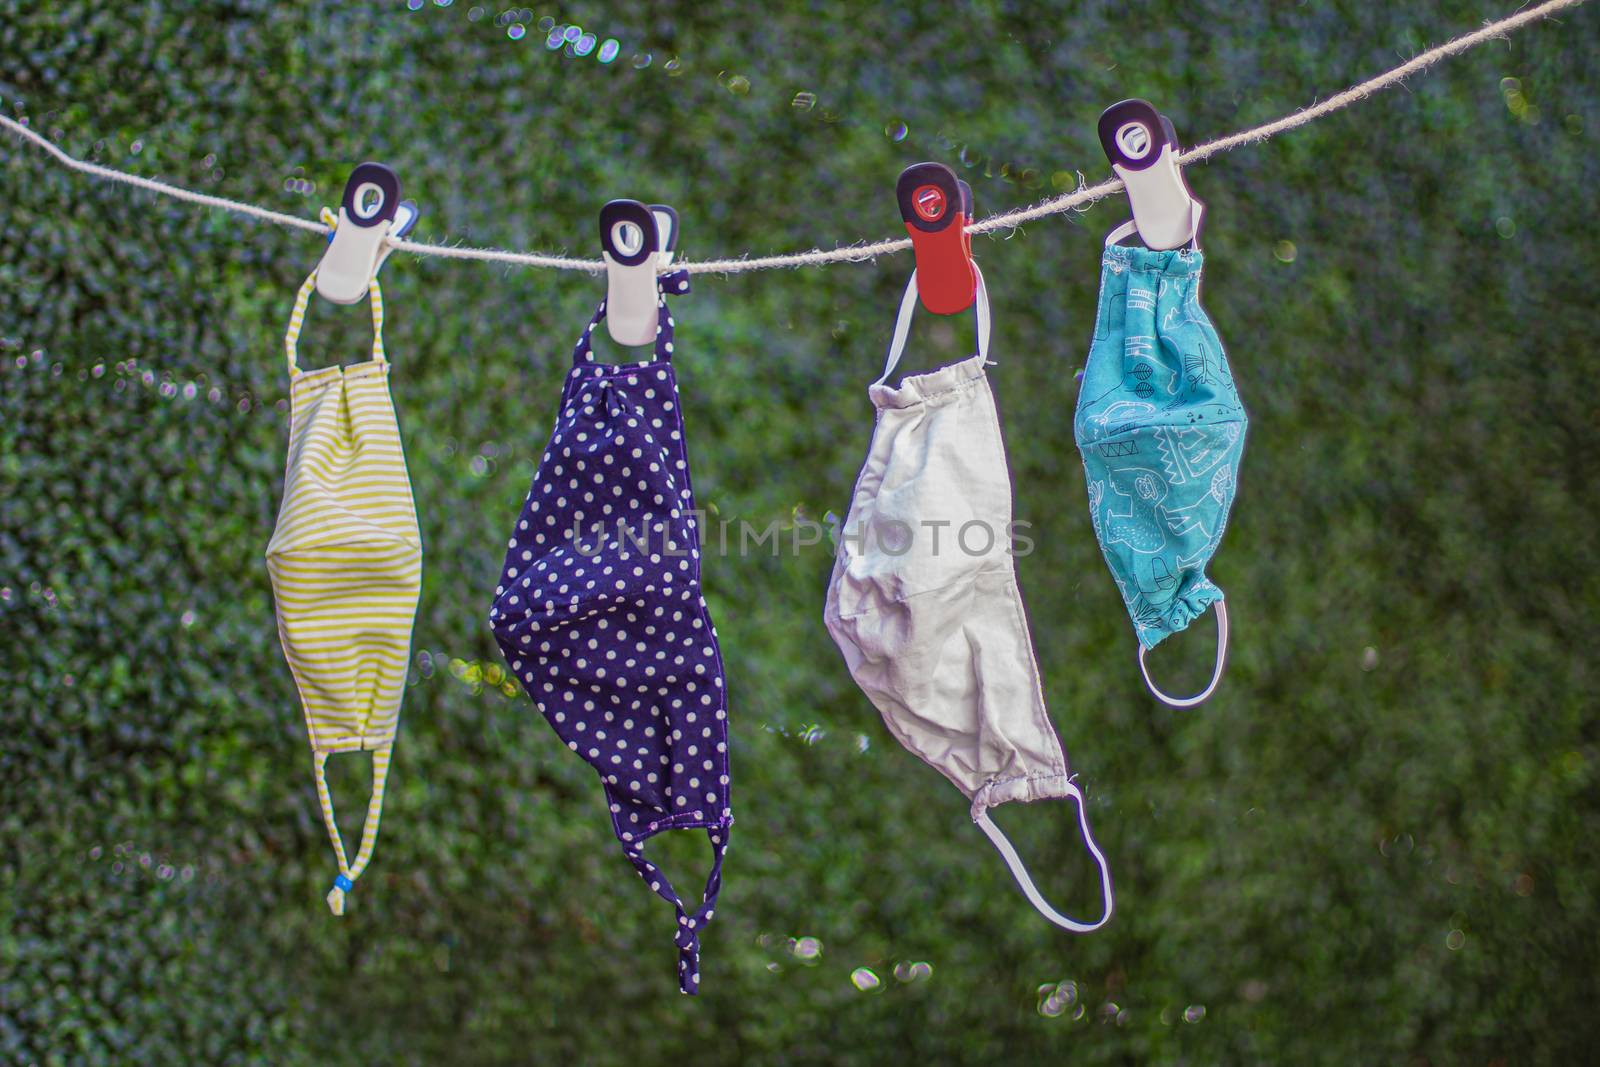 Drying outside re-usable family face masks, hang on a clothesline nylon rope with clothespins. by oasisamuel